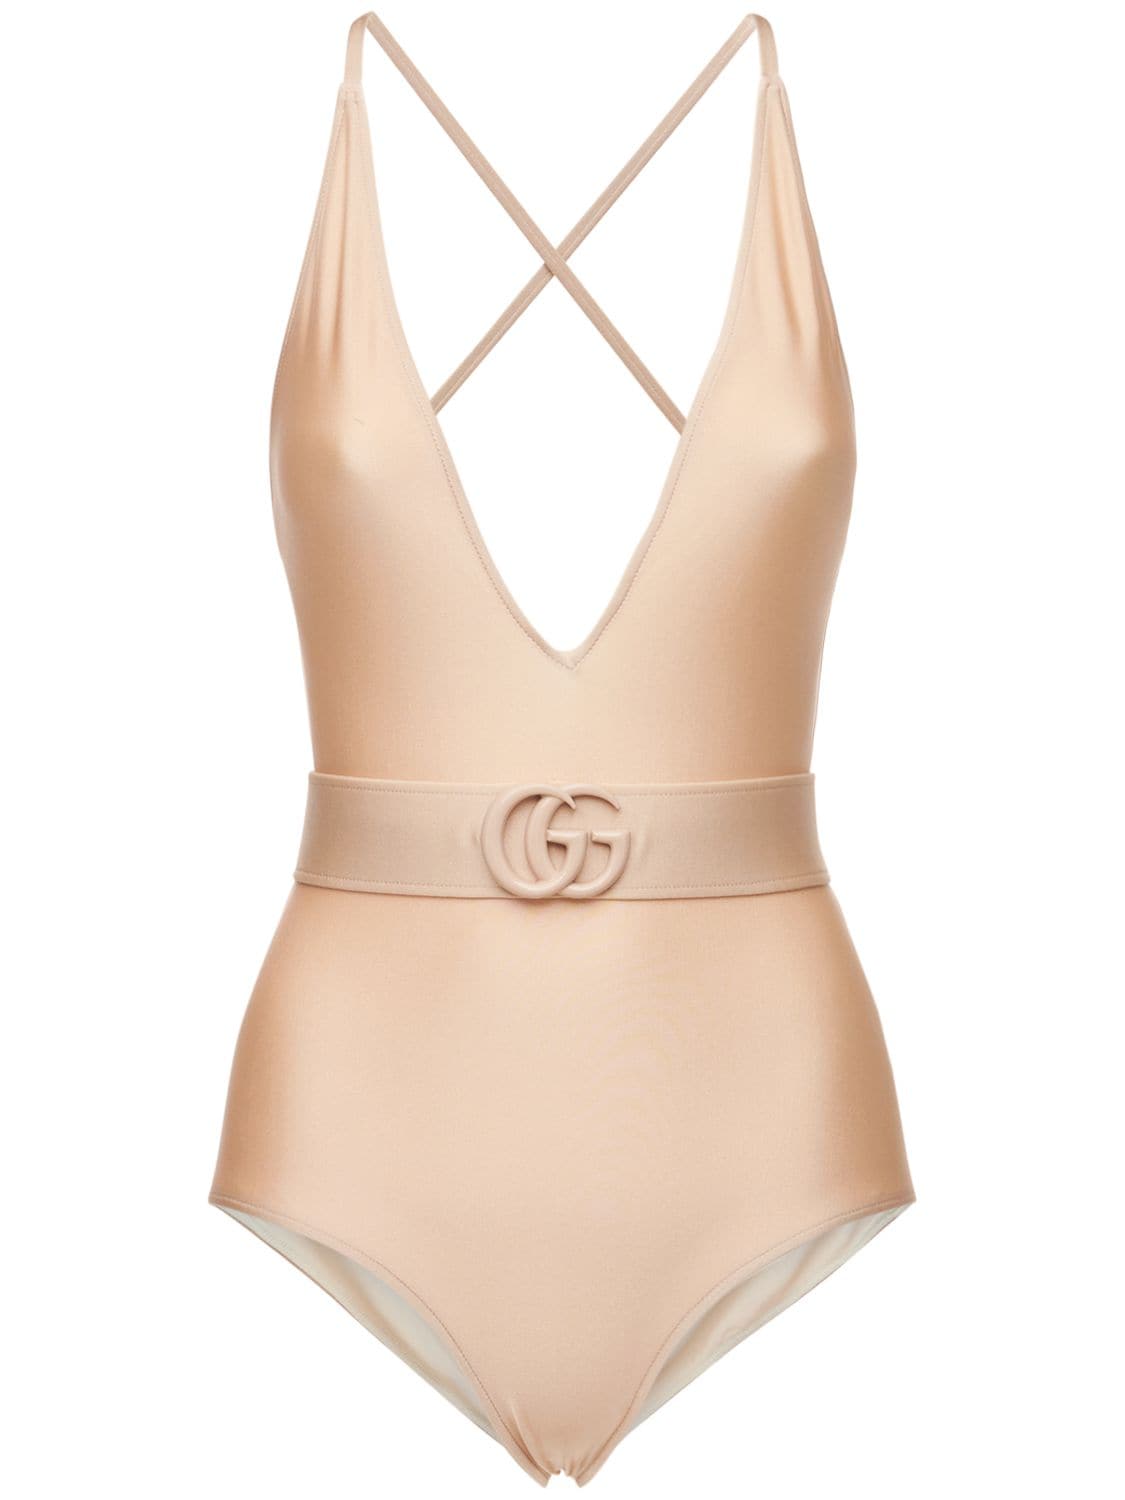 GUCCI Jersey Belted One Piece Swimsuit for Women